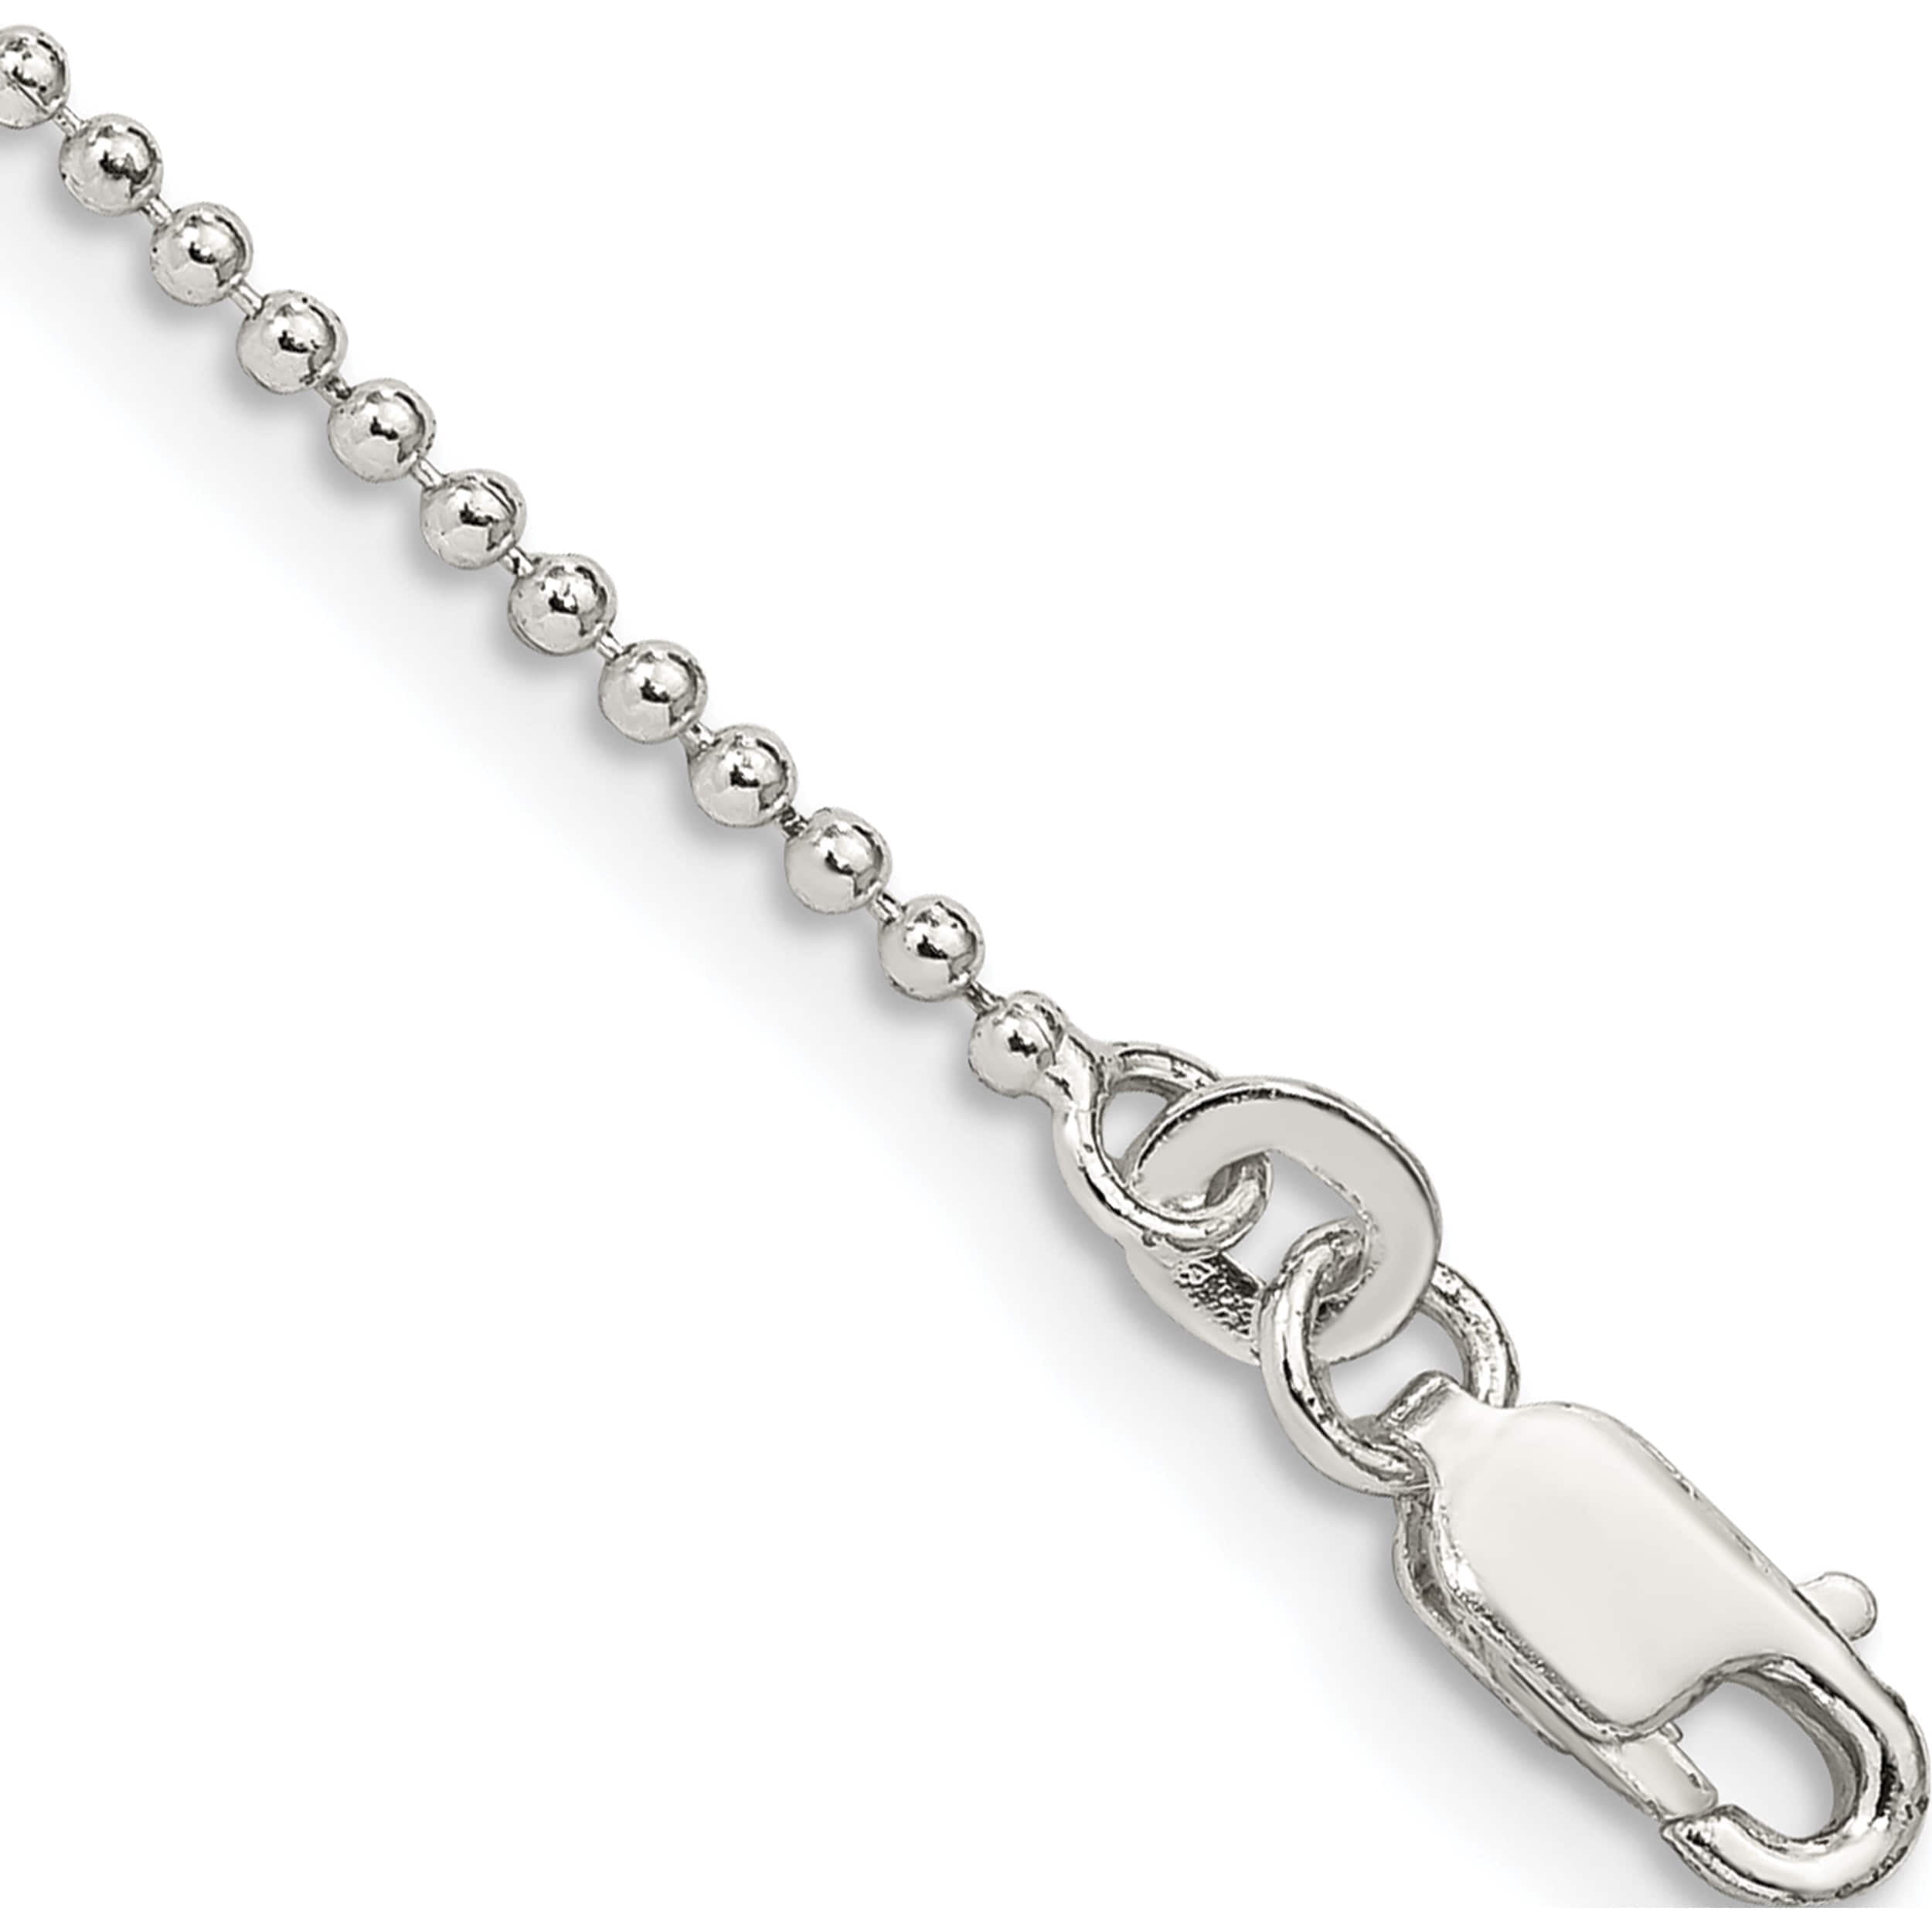 Stainless Steel Pea Chain 2-3 mm Wide 40 Necklace 120 Pendant Rolo Chain Unisex 